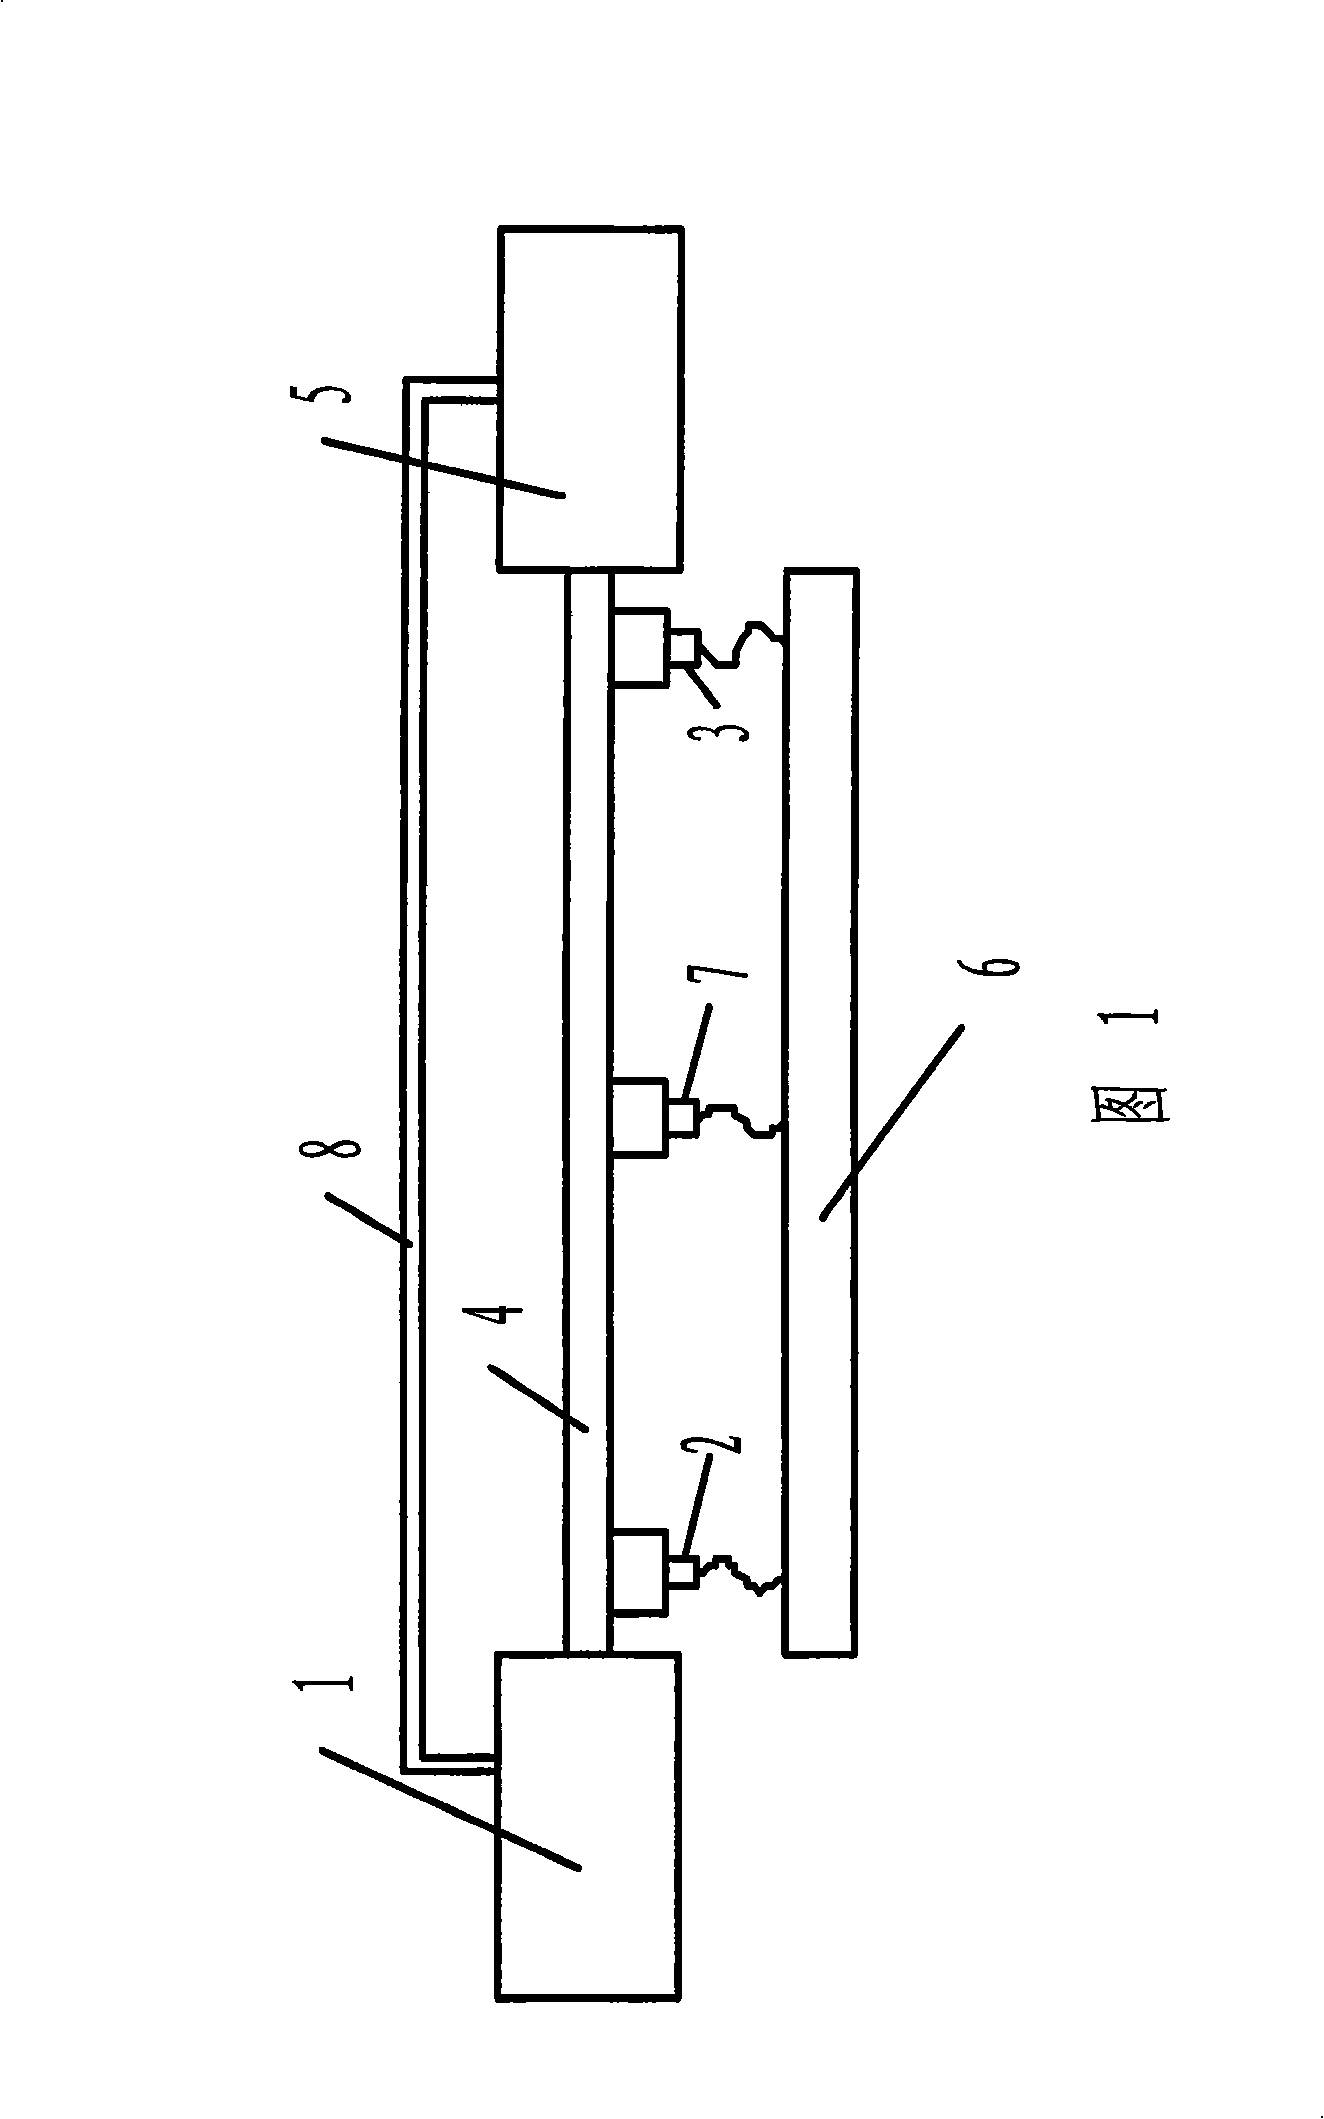 Method and device for measuring high polymer molten volume flow